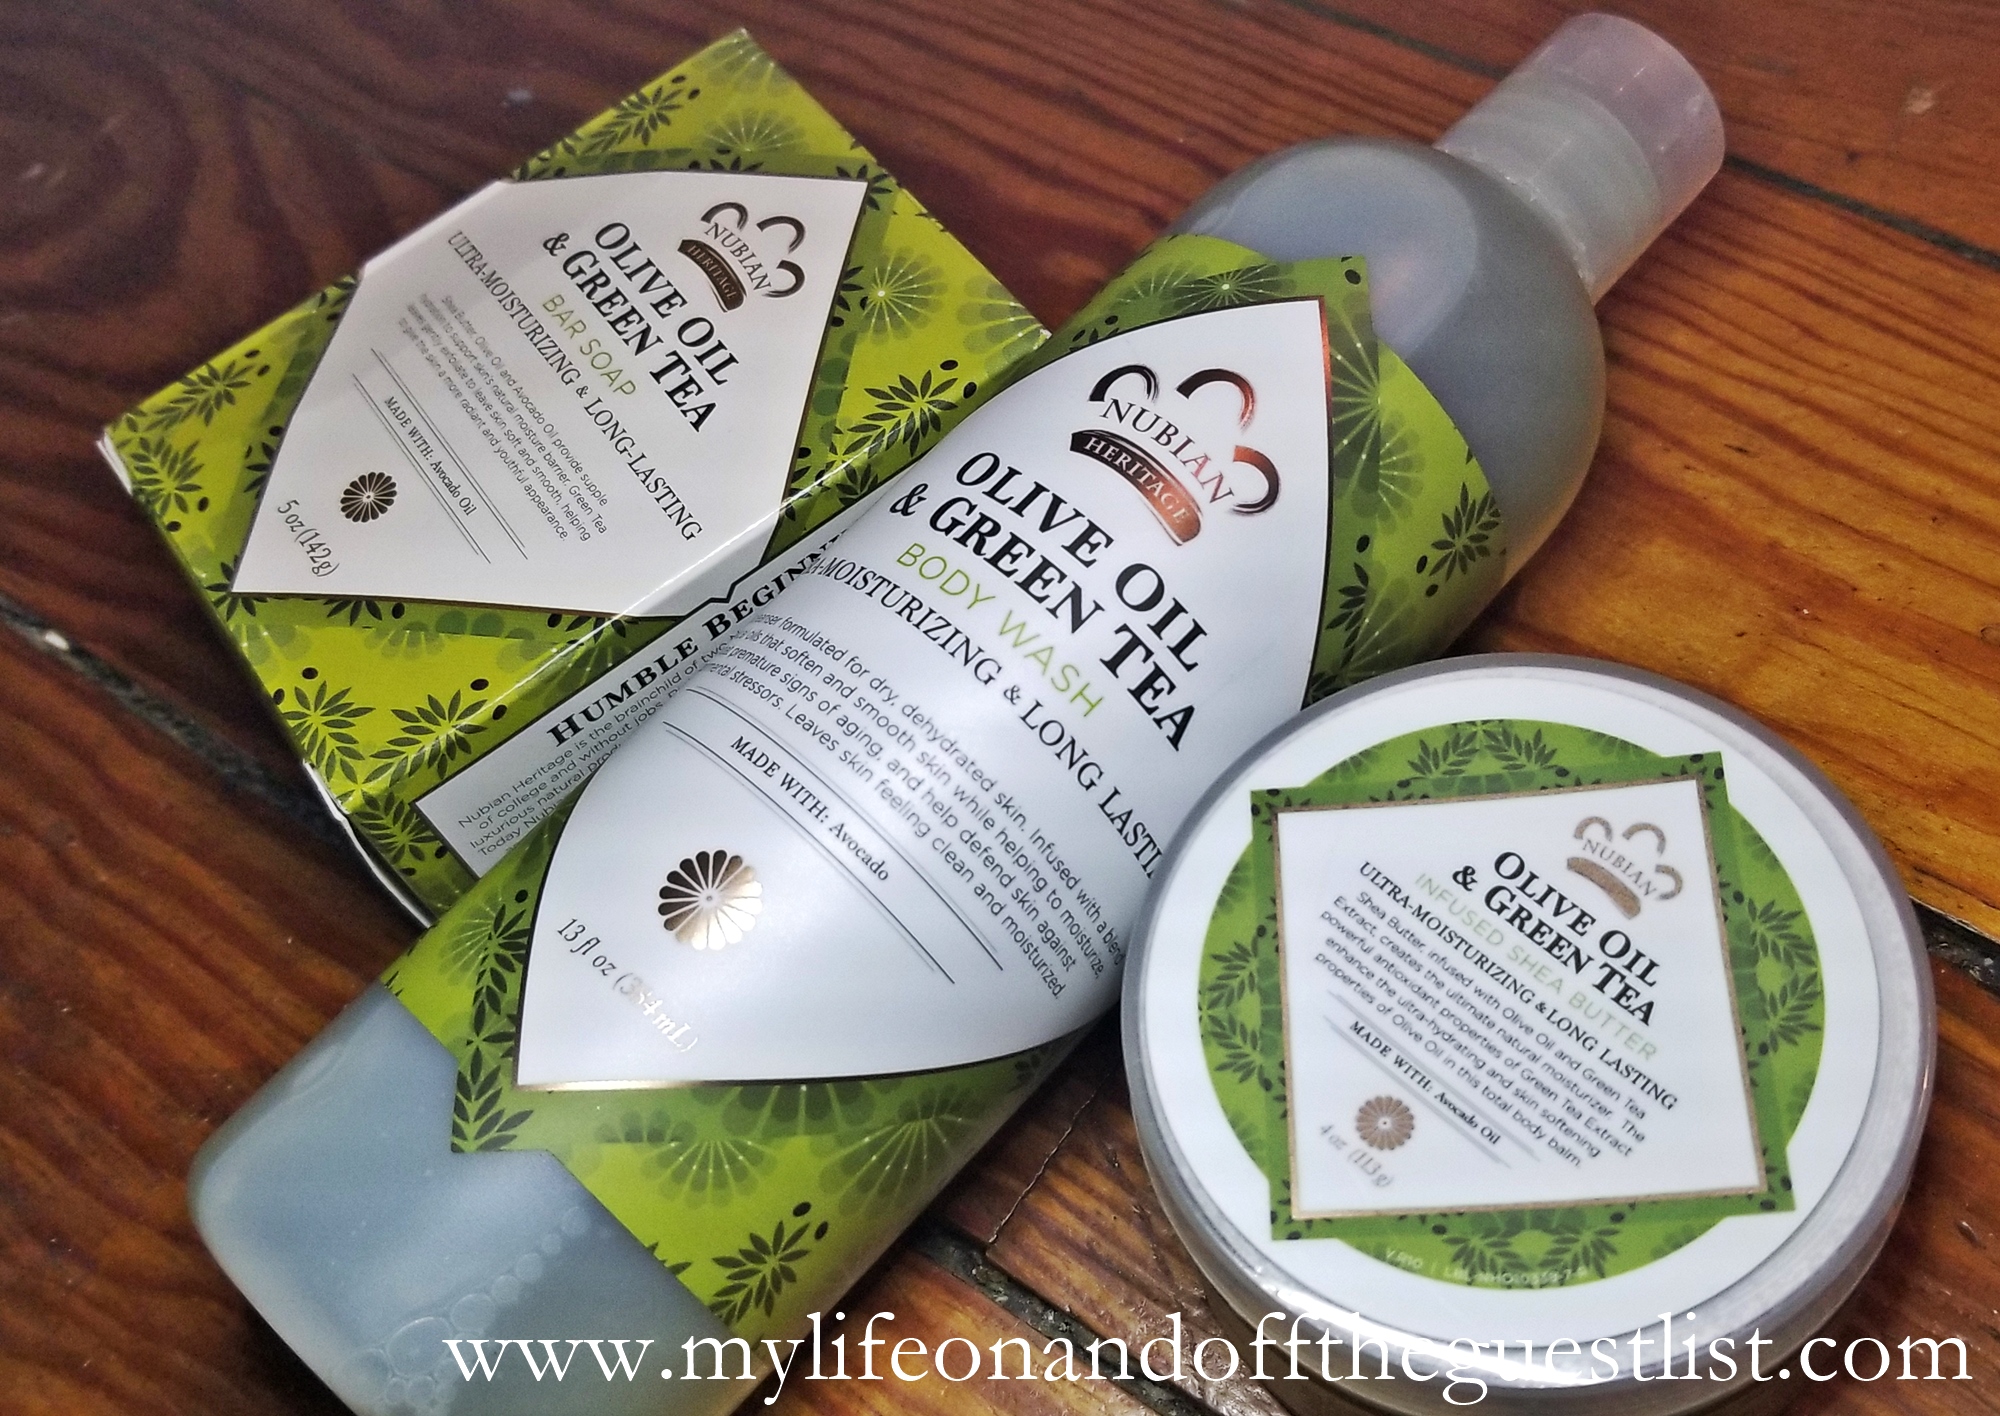 Nubian Heritage presents Olive Oil & Green Tea Collection